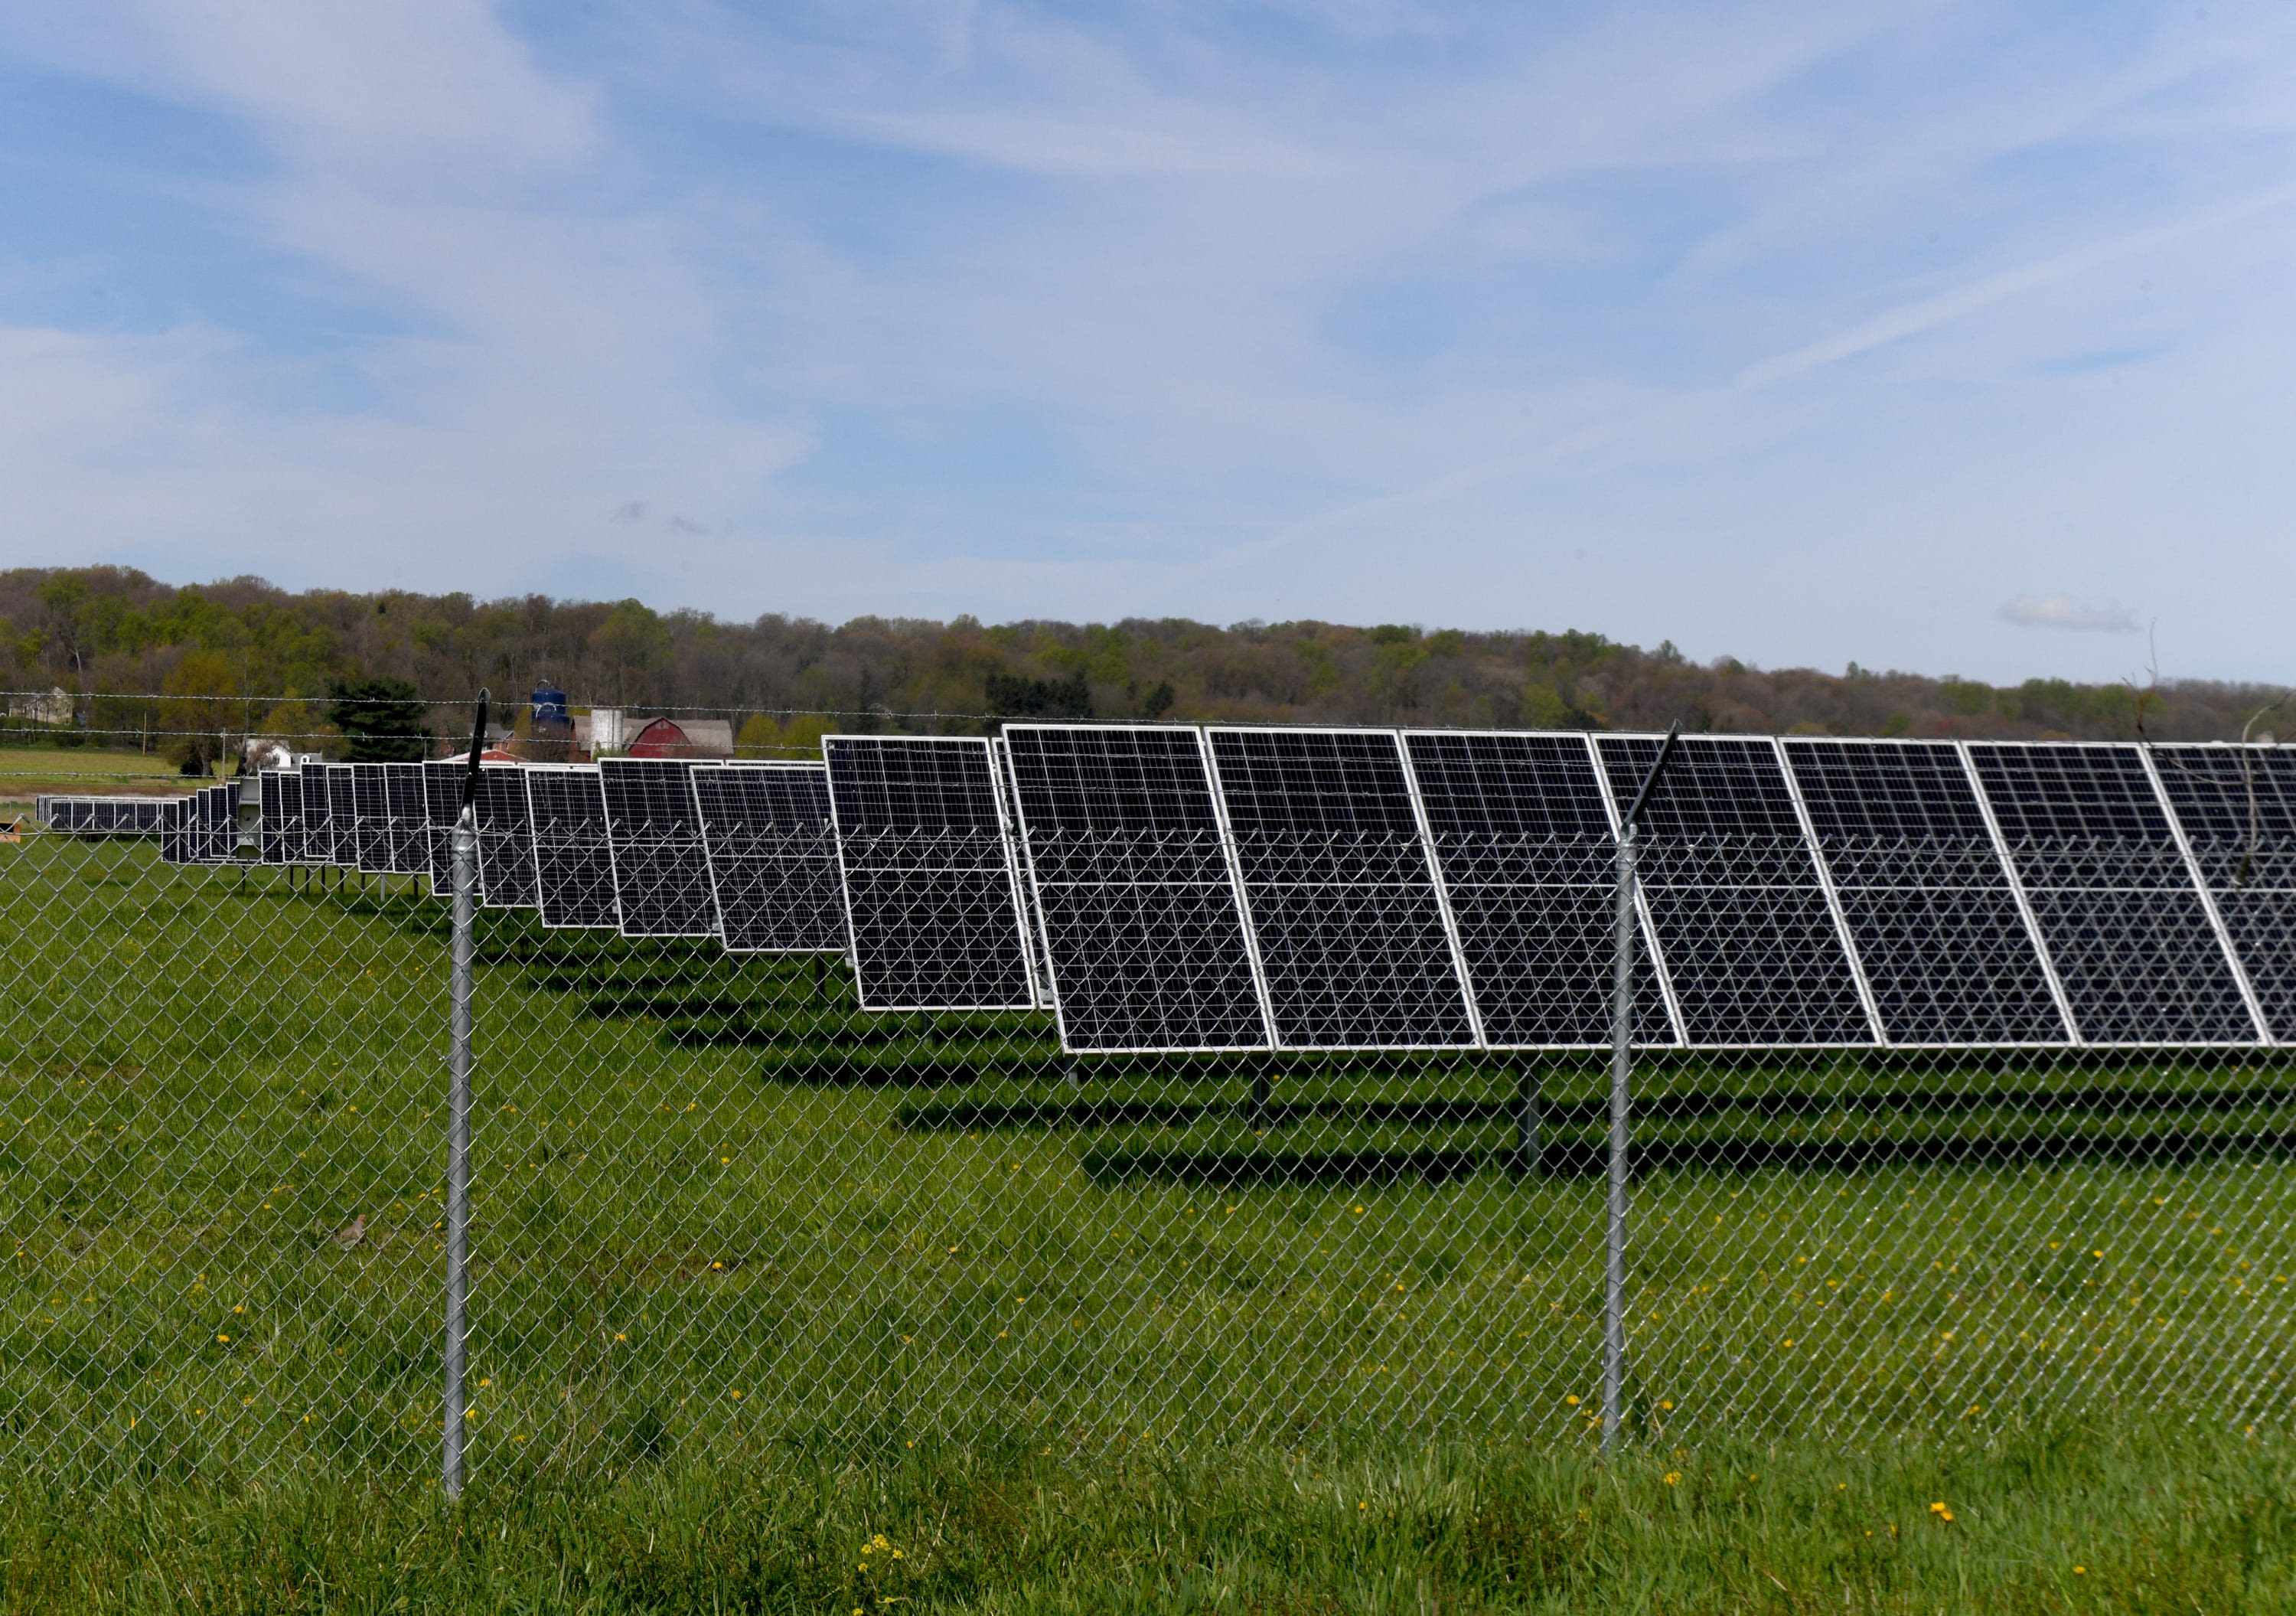 New state report recommends denial for proposed Stark Solar farm near Alliance